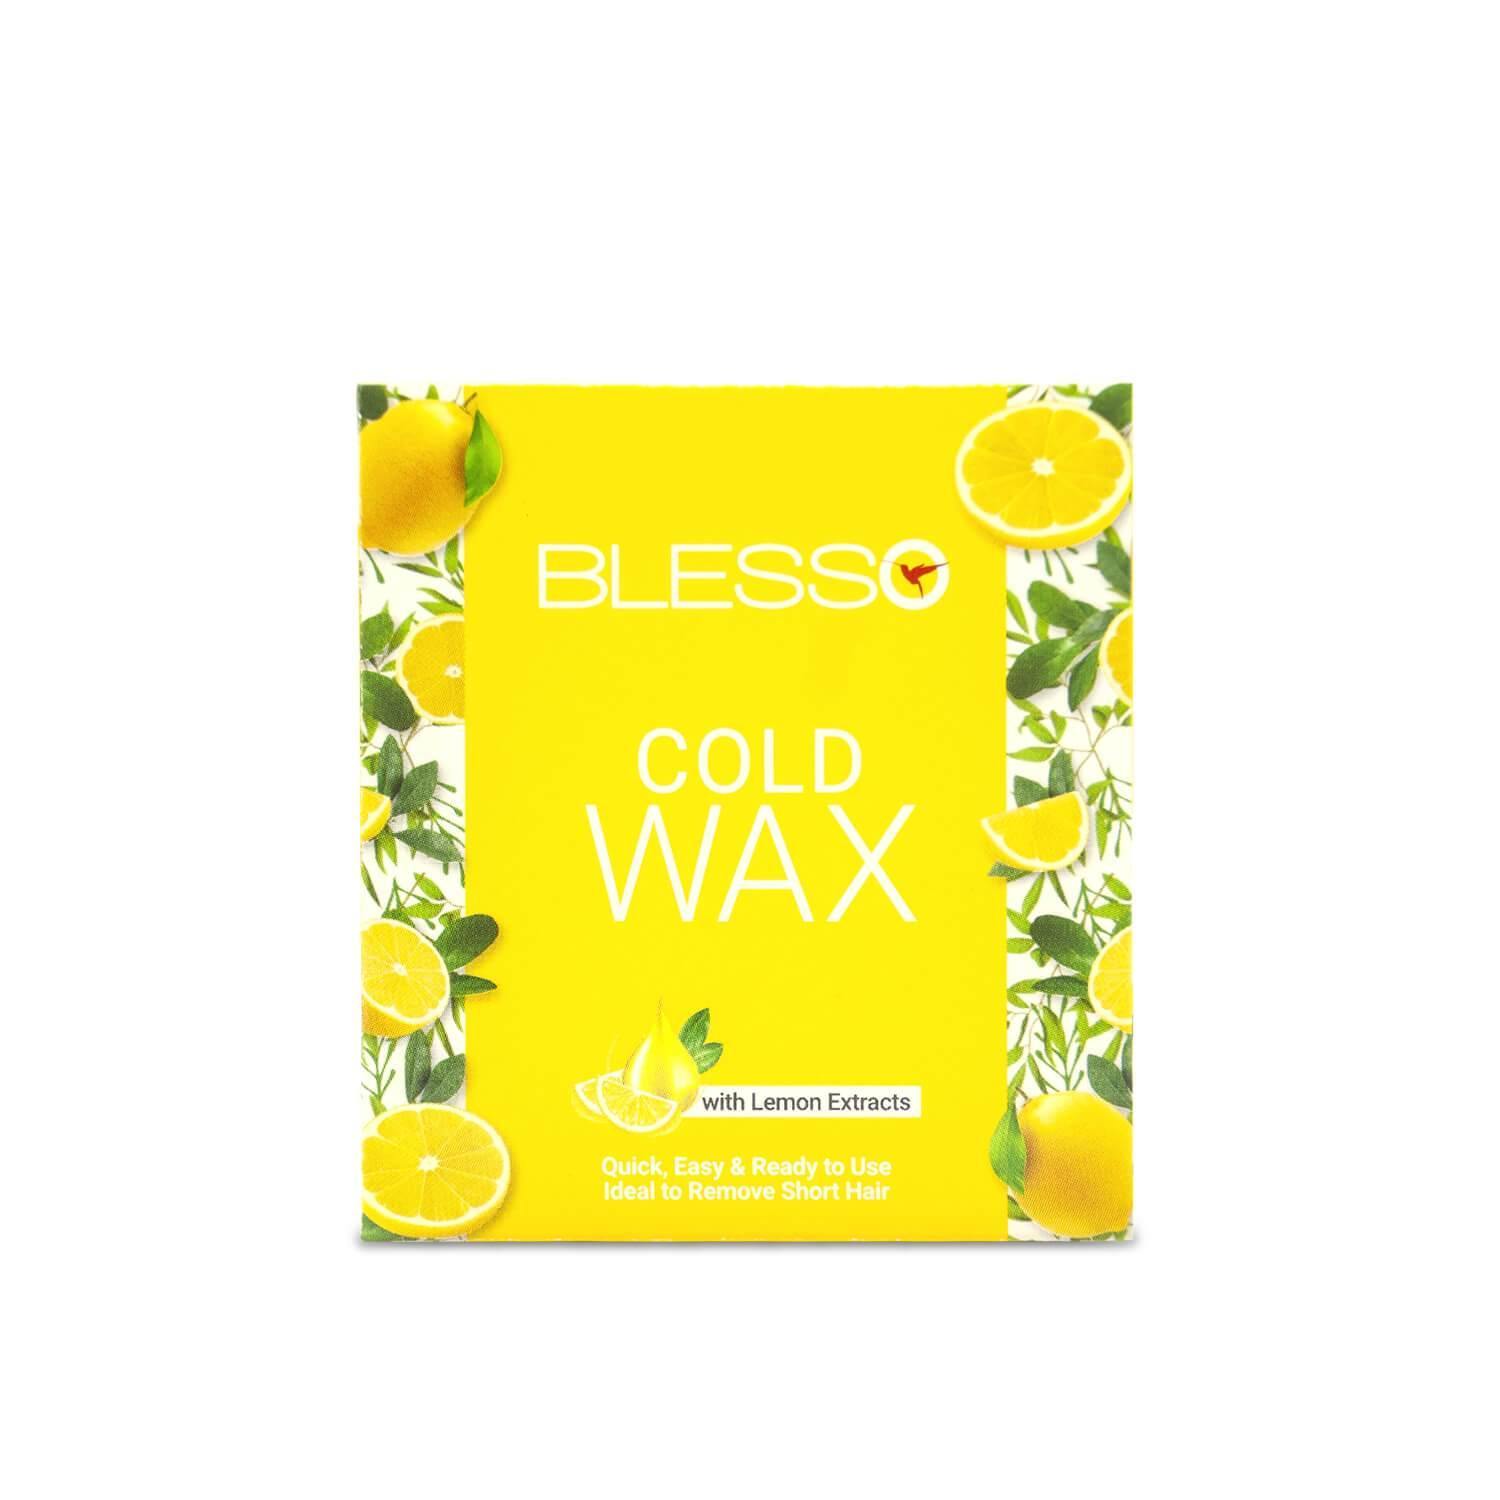 Blesso Cold Wax Lemon - Blesso Cosmetics